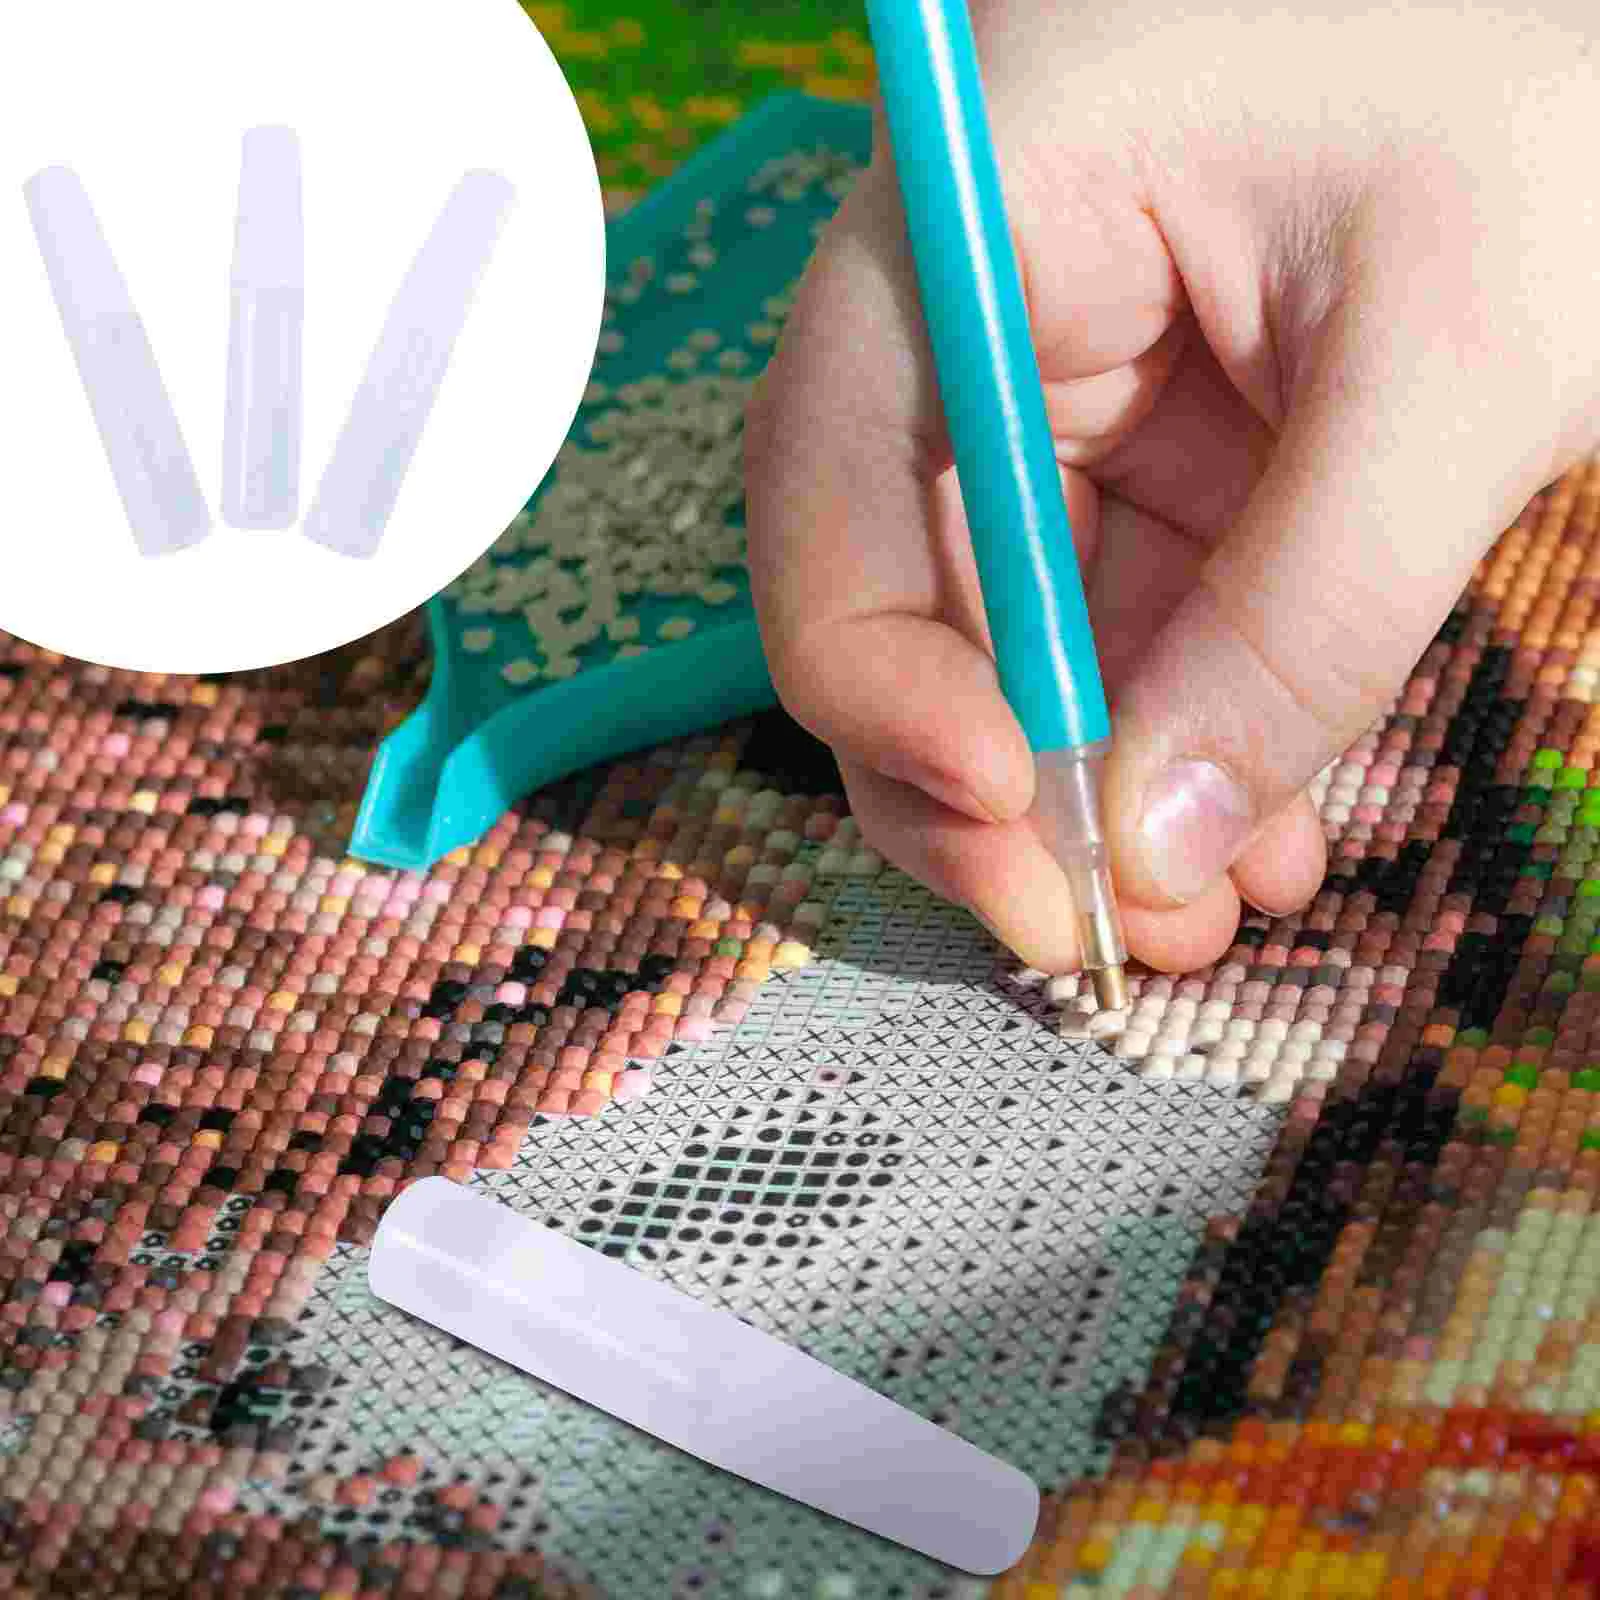 

Glue Painting Beads Diamond Cross Embroidery 5D Accessory Accessories Special Drilling Sealer Squeeze Tip Applicator Writer